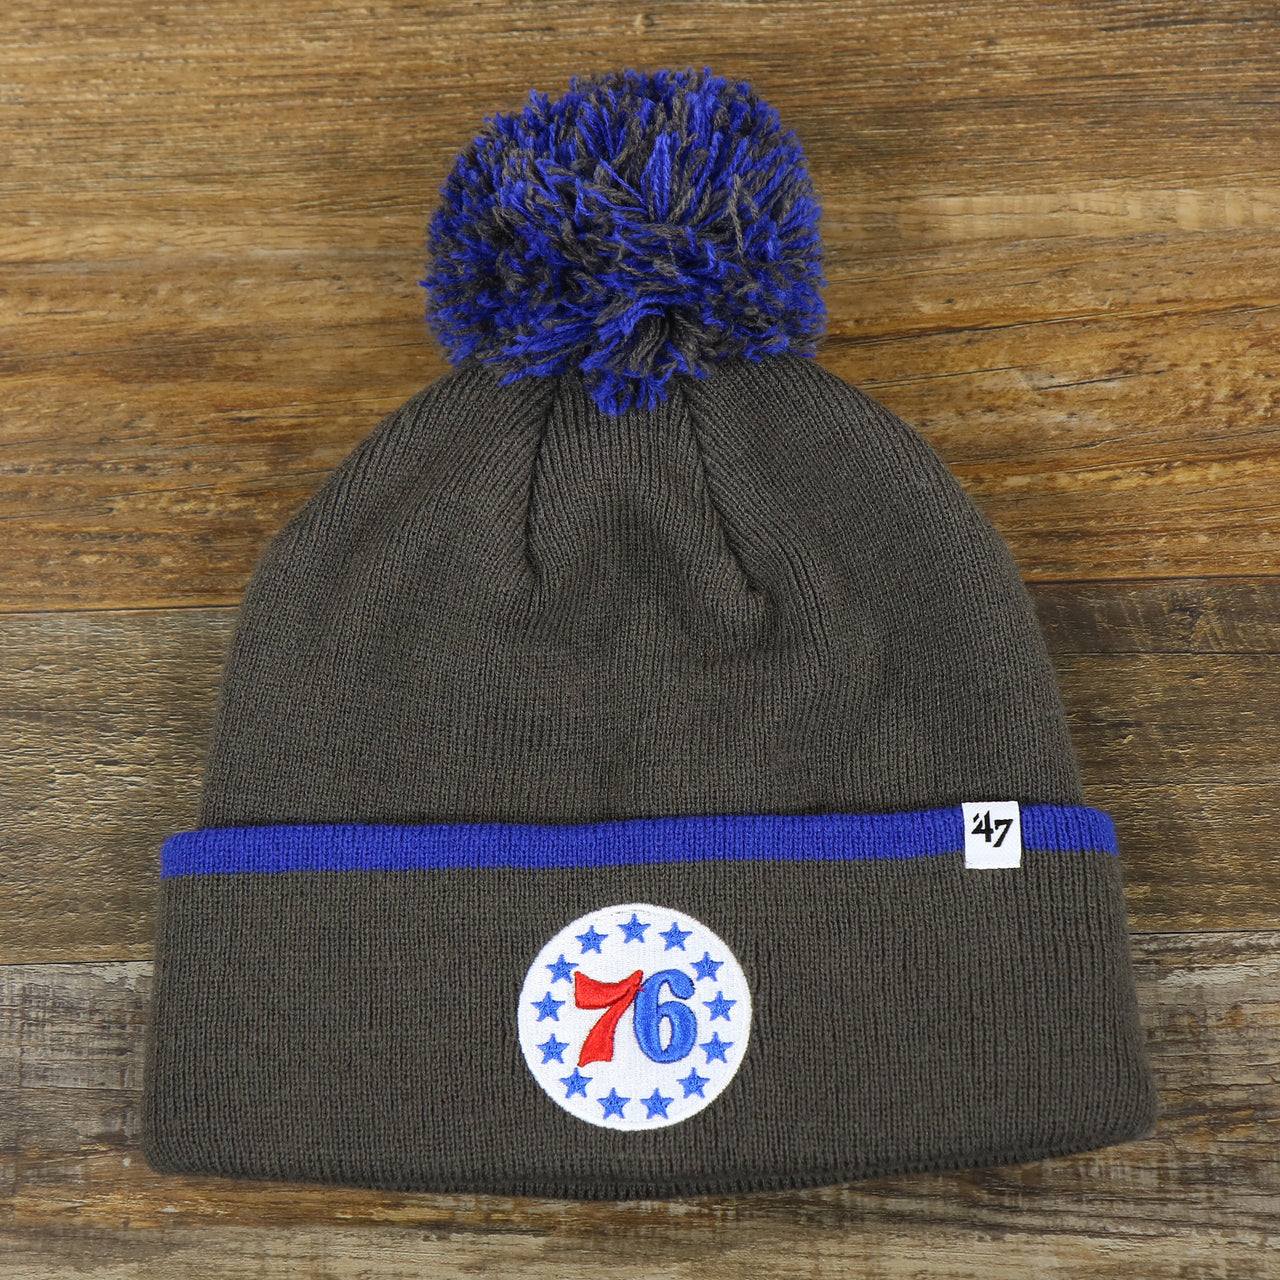 The front of the Philadelphia 76ers Cuffed Logo Baraka Knit Charcoal Winter Beanie | Gray And Royal Blue Beanie